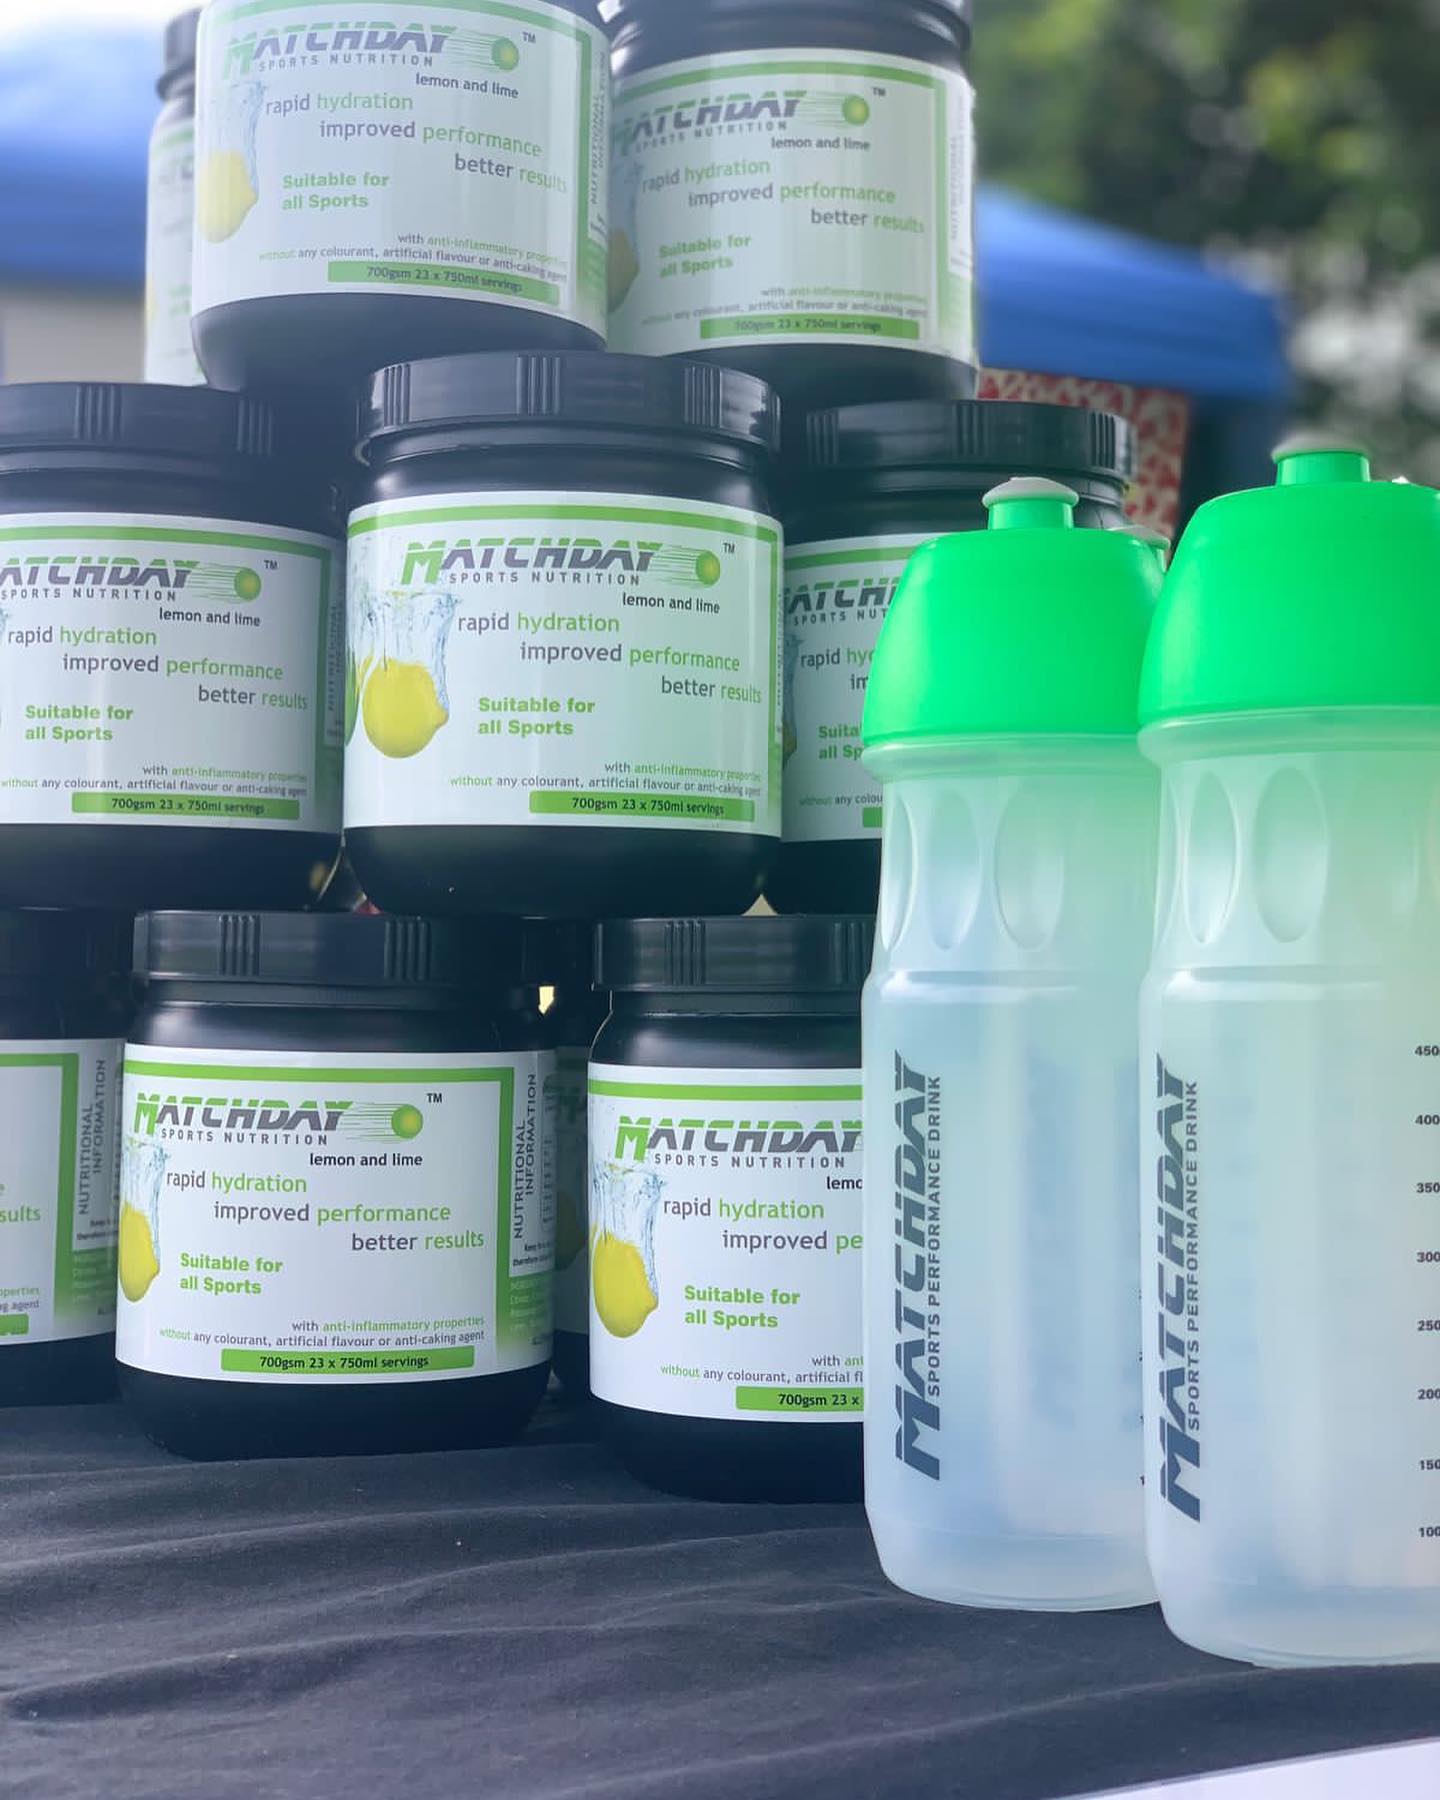 Matchday Sports Nutrition